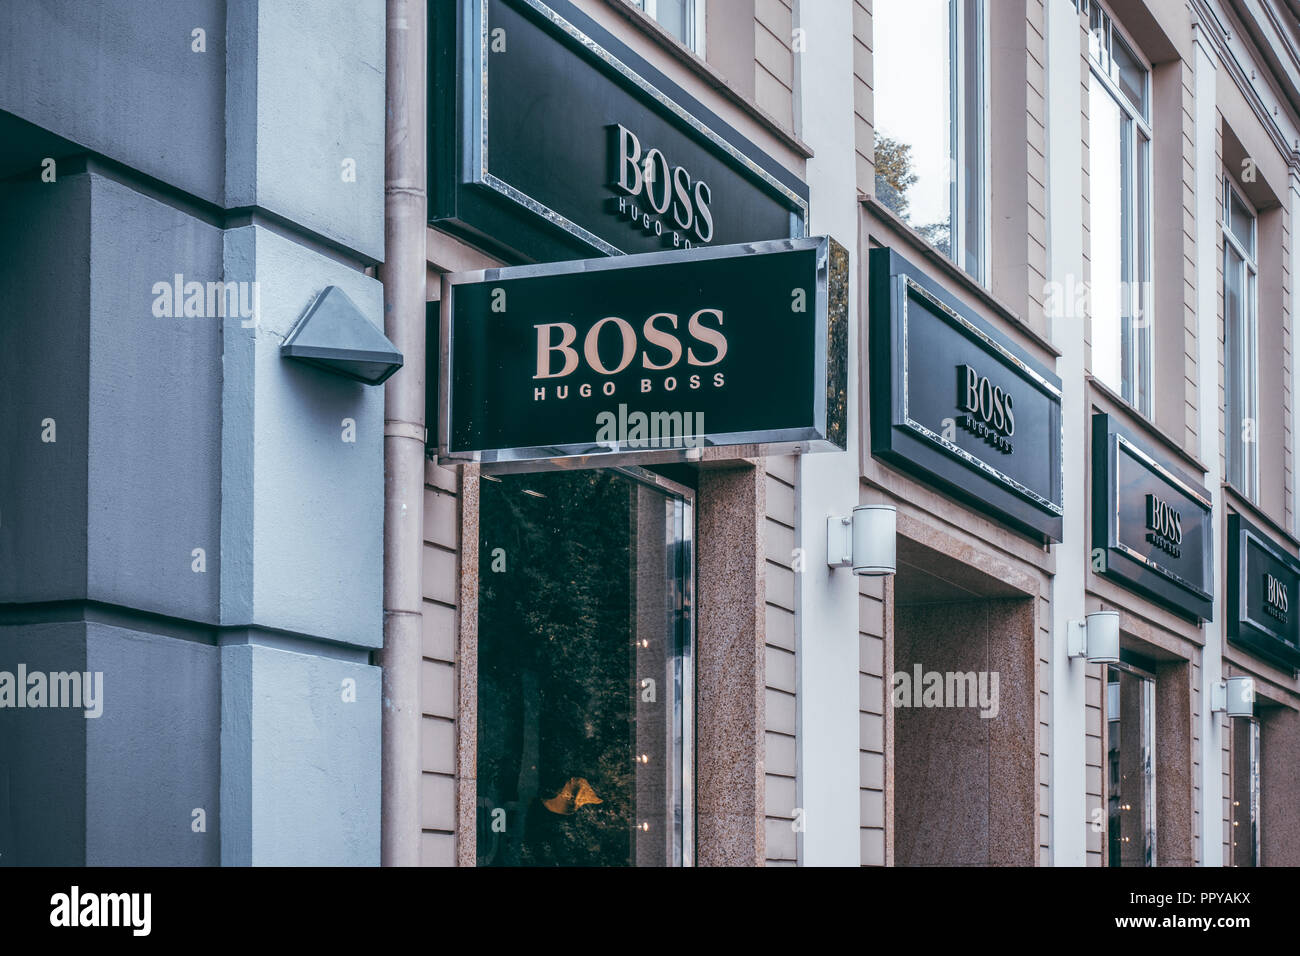 Hugo Boss Clothes Shop High Resolution Stock Photography and Images - Alamy